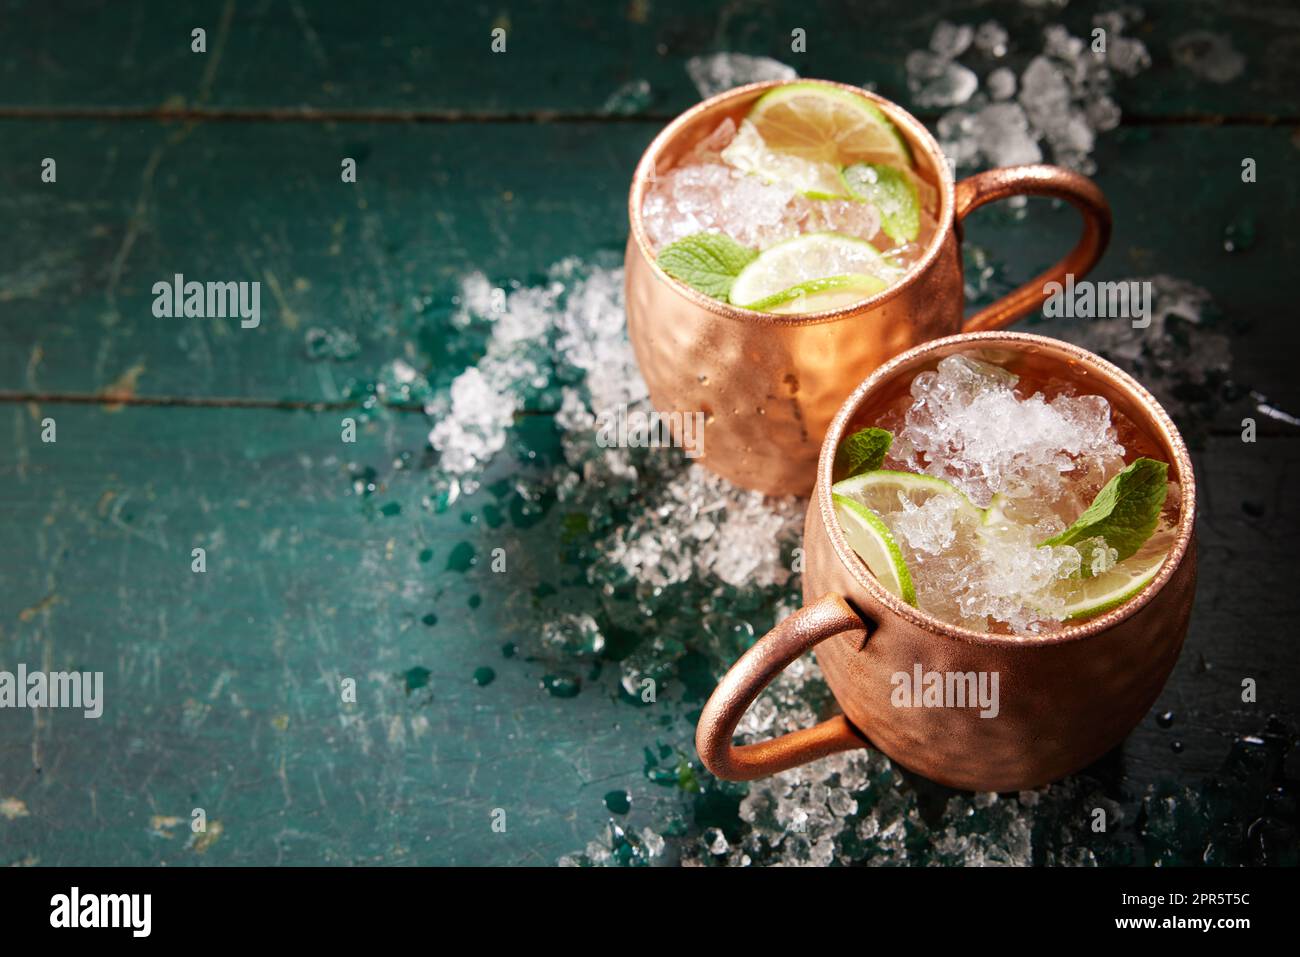 Moscow mule cocktails with ice on table Stock Photo